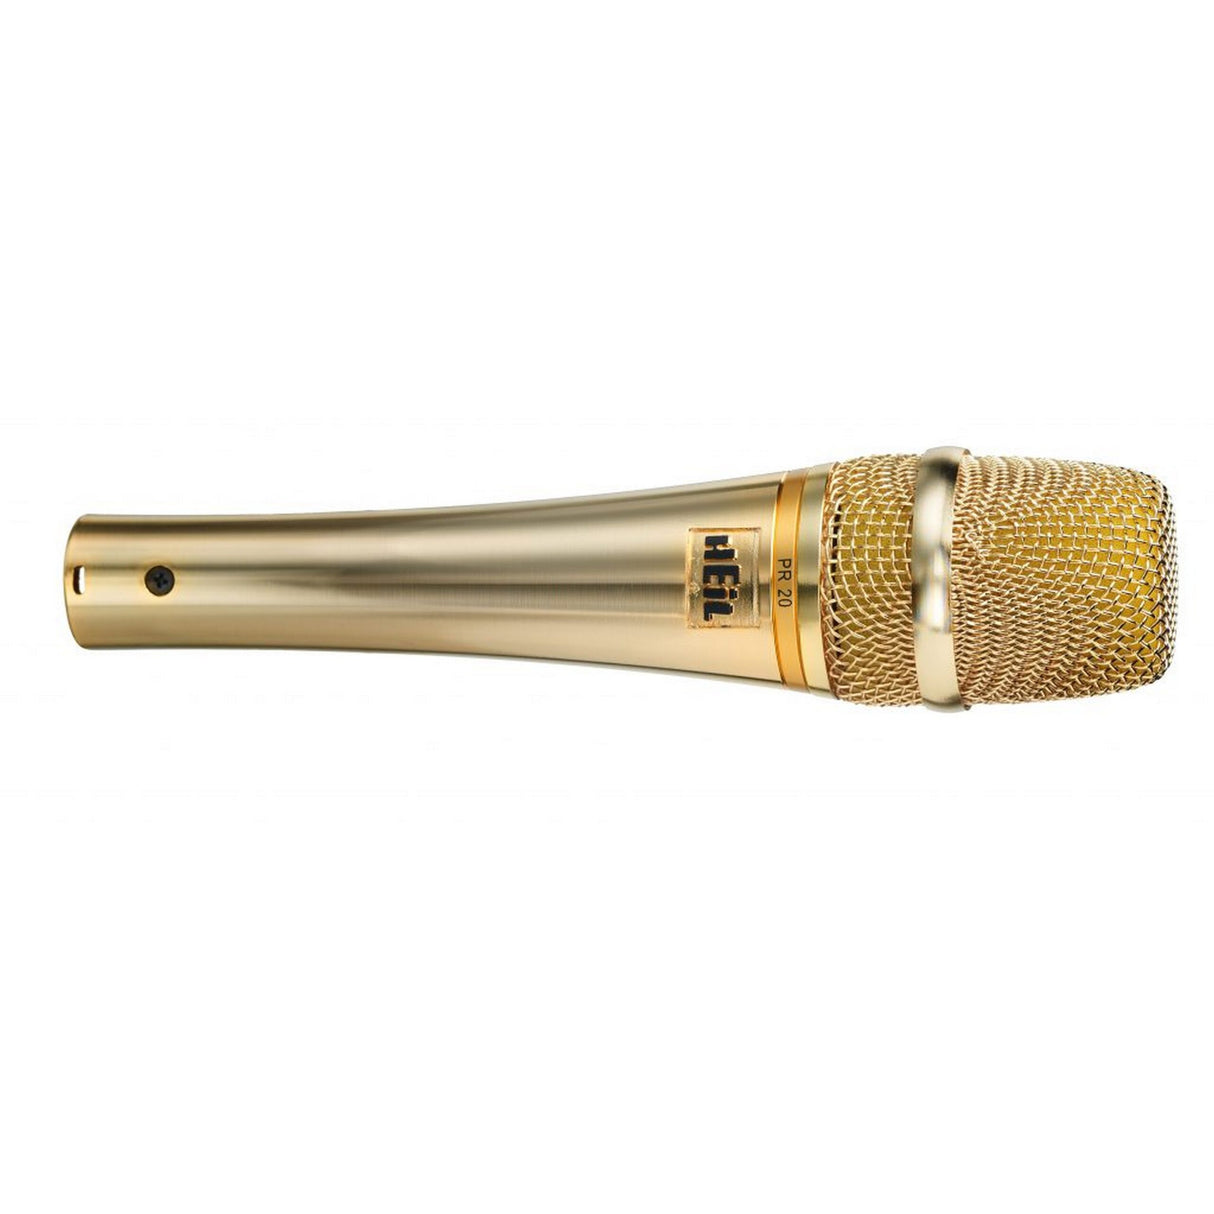 Heil Sound PR20 Gold Cardioid Dynamic Microphone, Gold (Used)